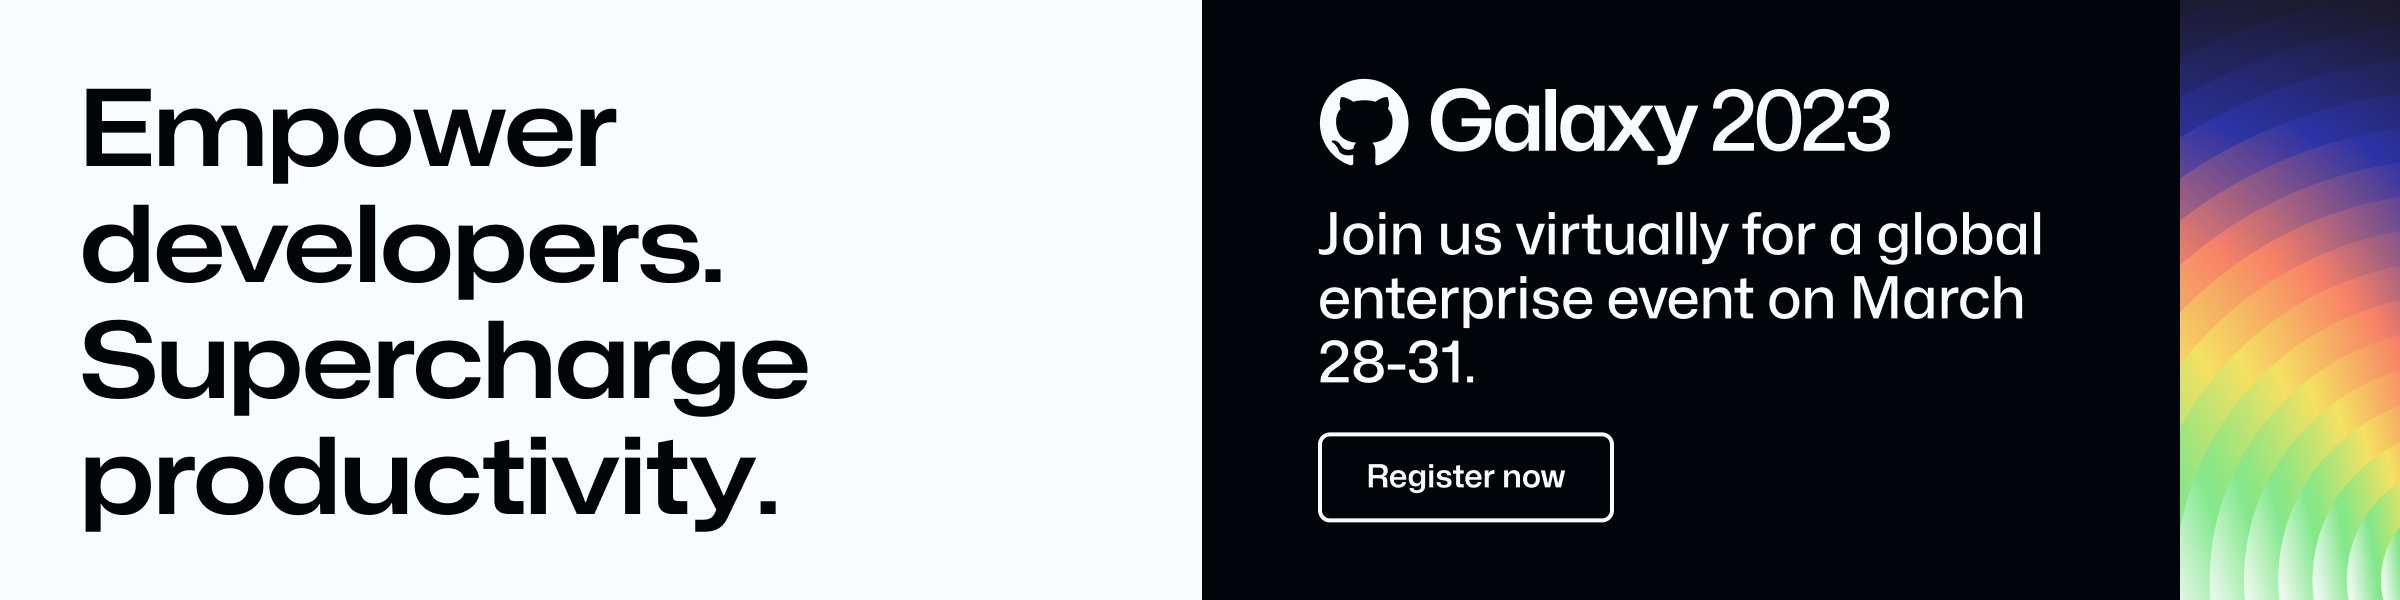 GitHub Enterprise Server 3.8 is now generally available